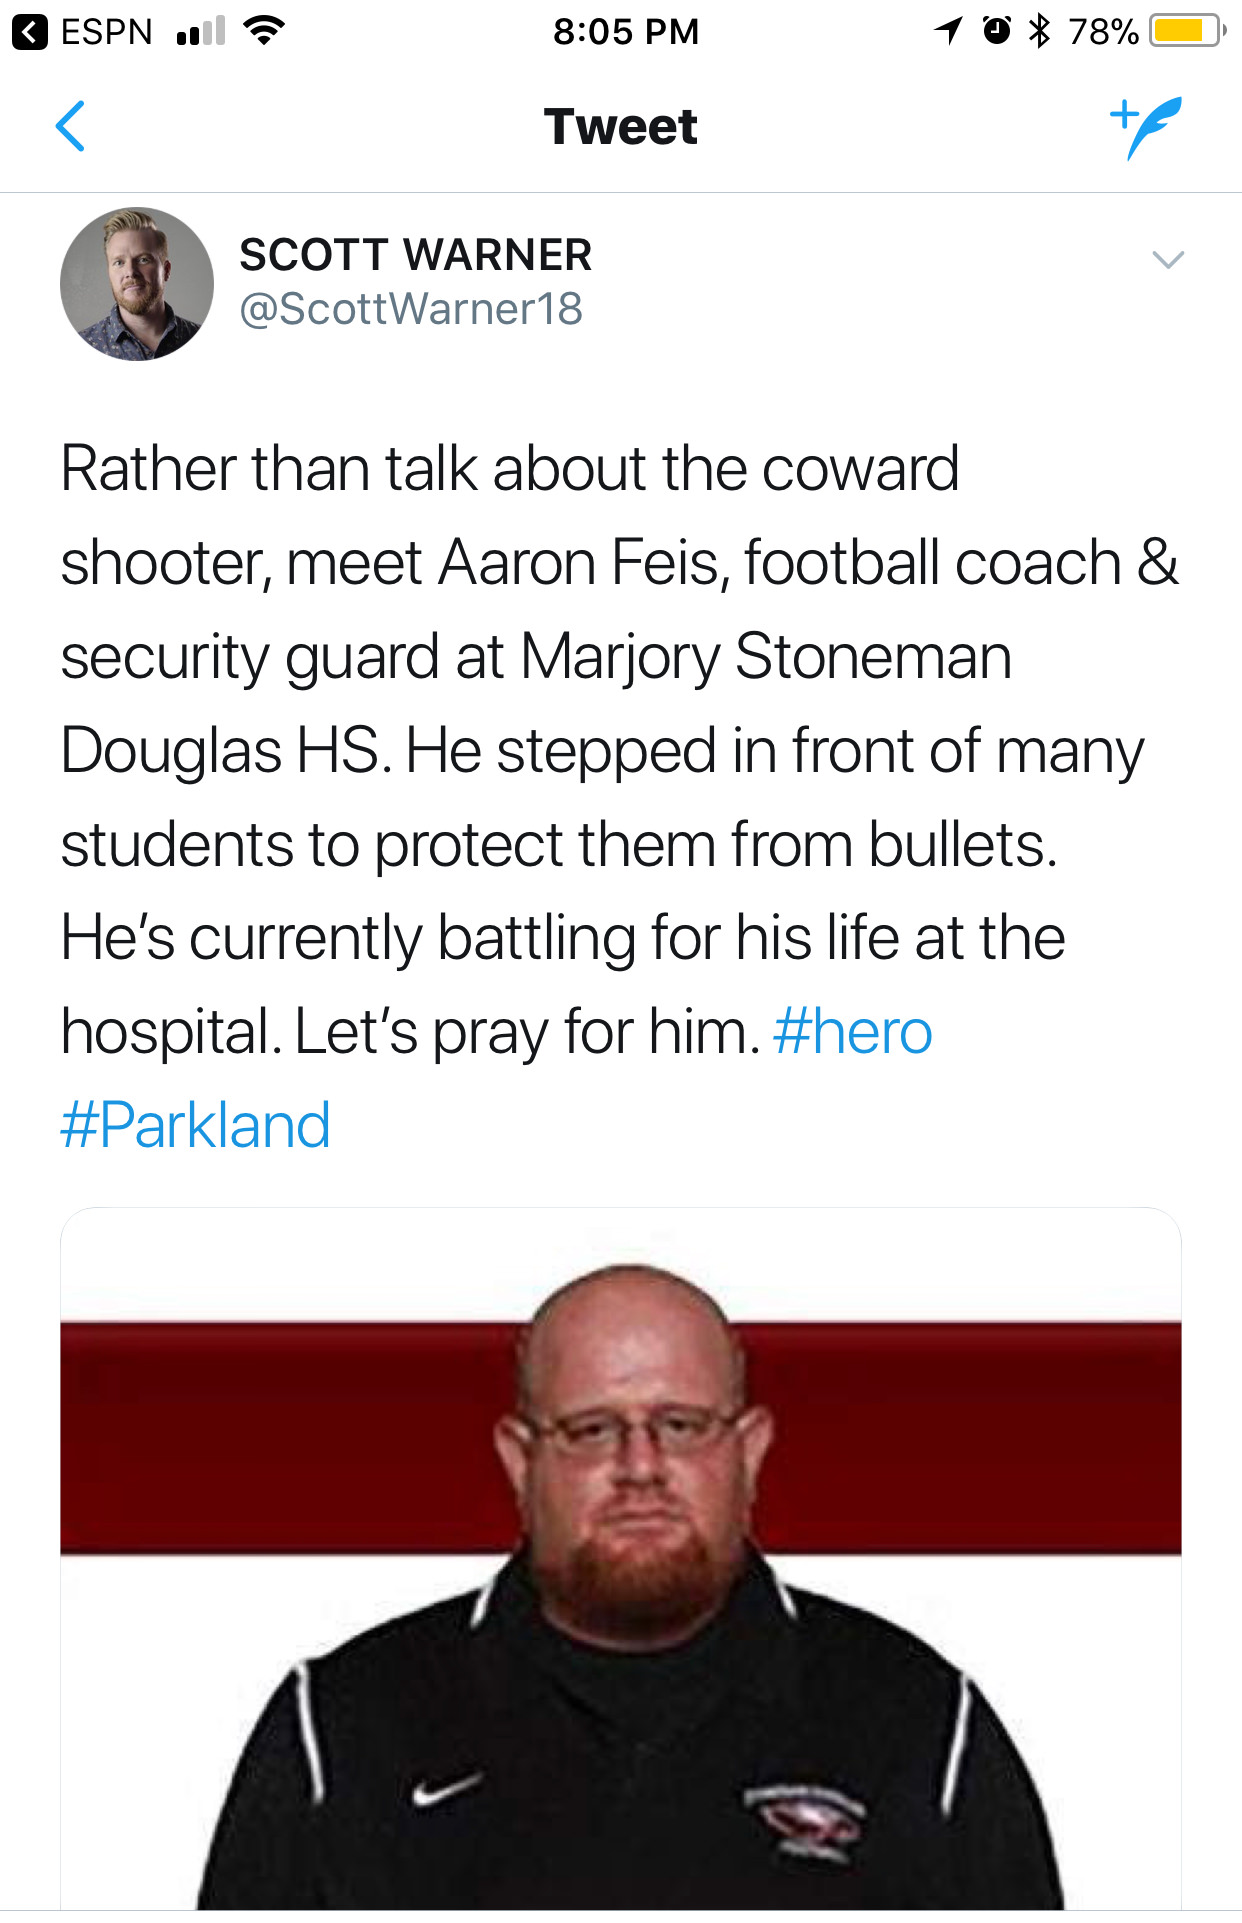 angle - Espn ulo 1 0 78% O Tweet Scott Warner Rather than talk about the coward shooter, meet Aaron Feis, football coach & security guard at Marjory Stoneman Douglas Hs. He stepped in front of many students to protect them from bullets. He's currently bat